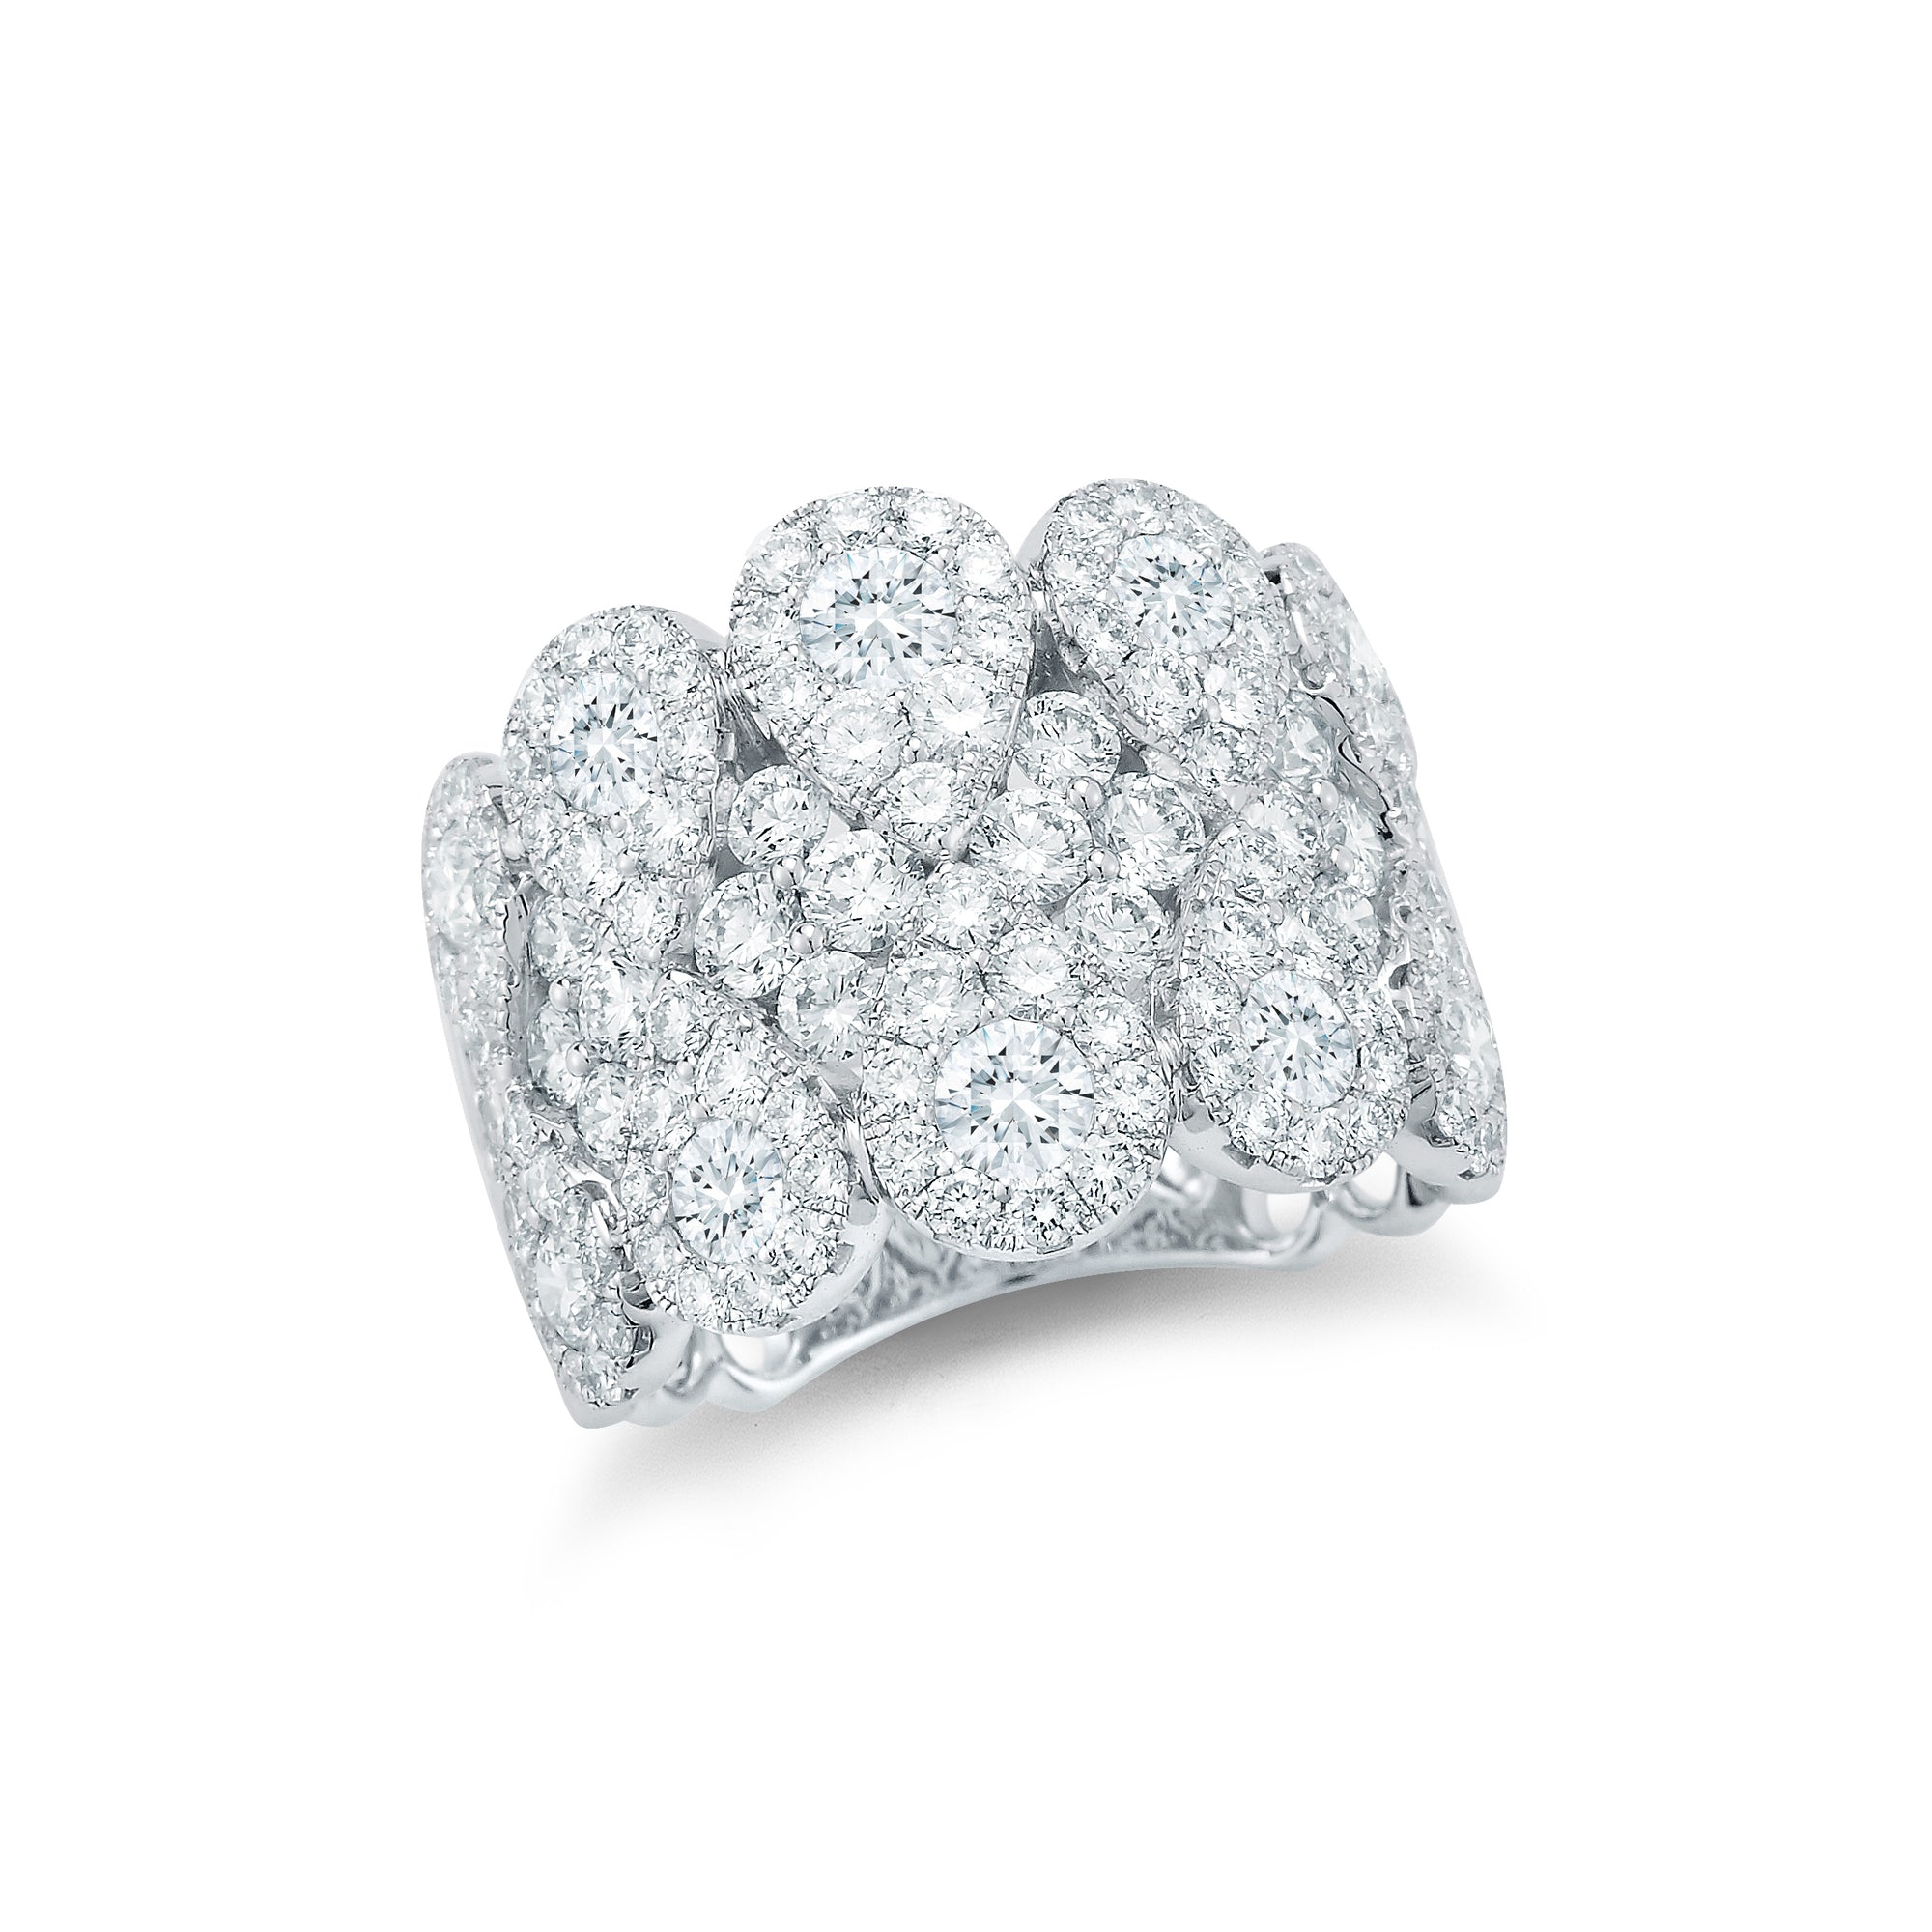 Diamond Cluster Ring  18k gold, 8.15 grams, 26 round shared prong-set diamonds 1.93 carats, 108 round shared prong-set diamonds 1.62 carats.  Total diamond weight 3.55 carats  Size 17 millimeters width